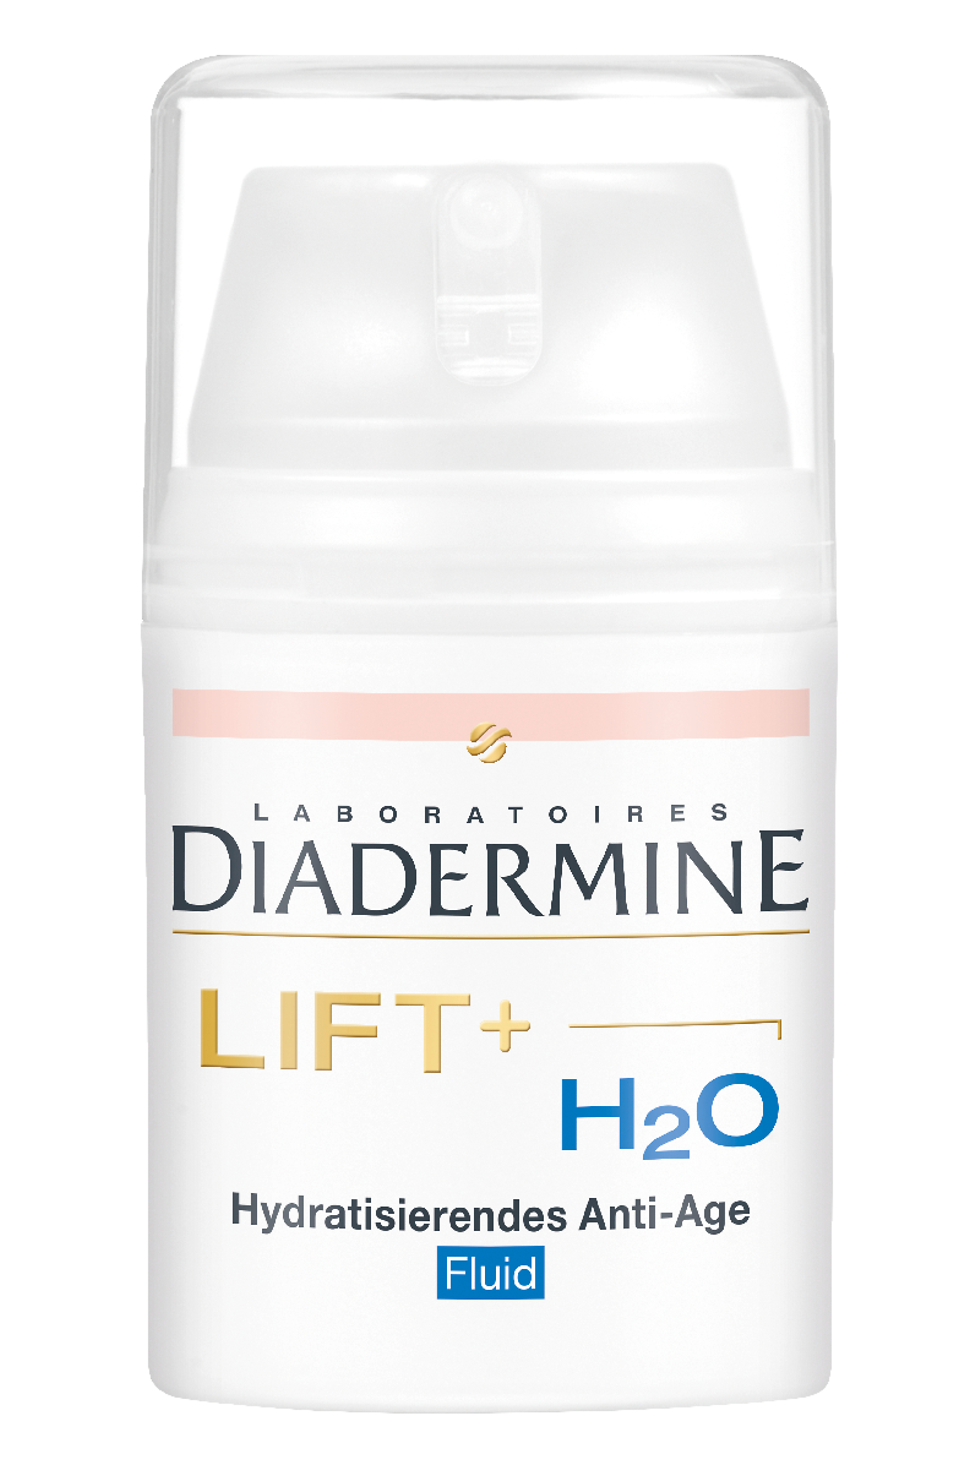 Diadermine Lift+ H2O Hydratisierendes Anti-Age Fluid